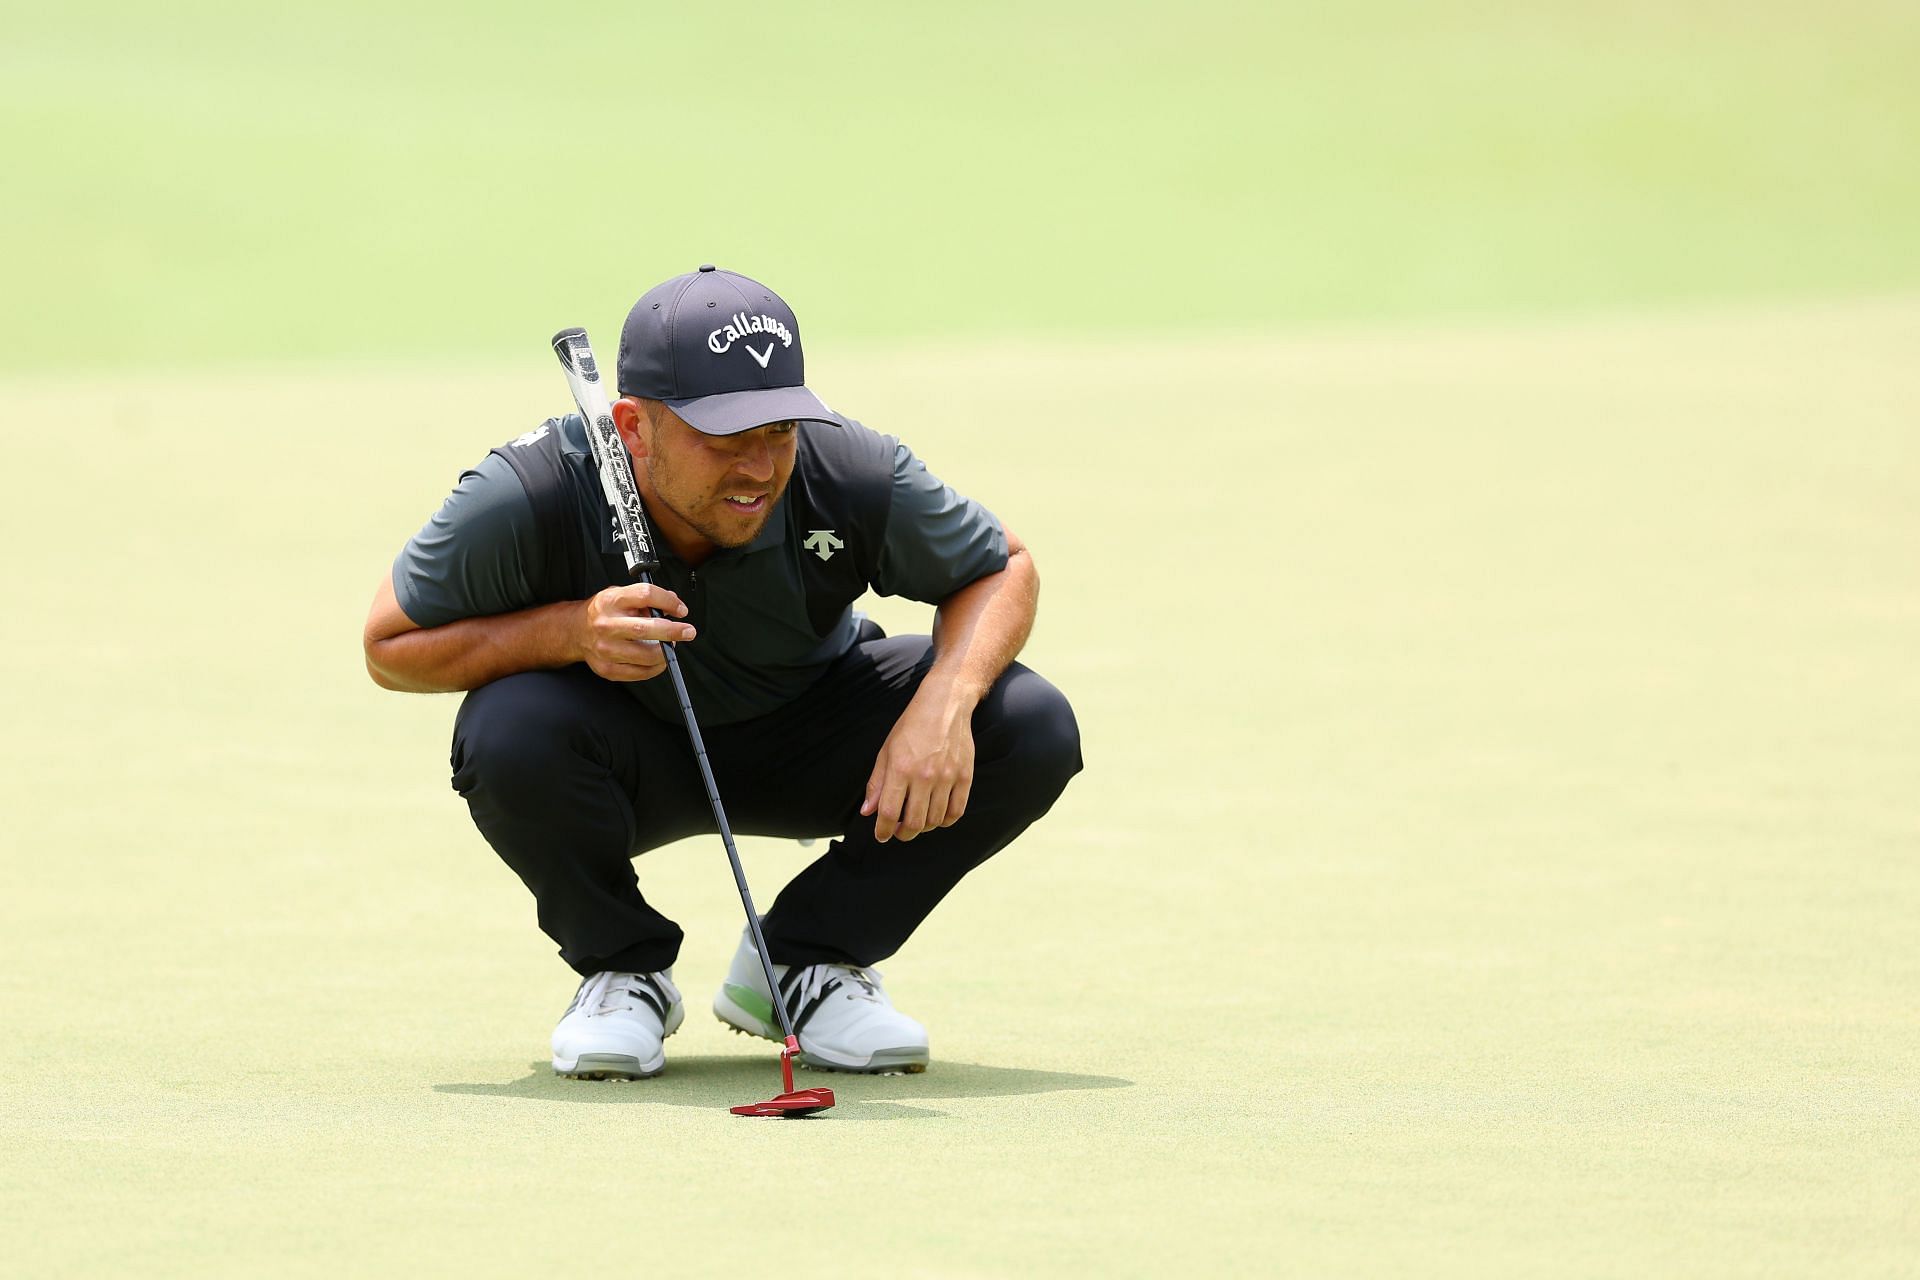 Xander Schauffele looks over a putt on the fourth hole during the final round of the US Open